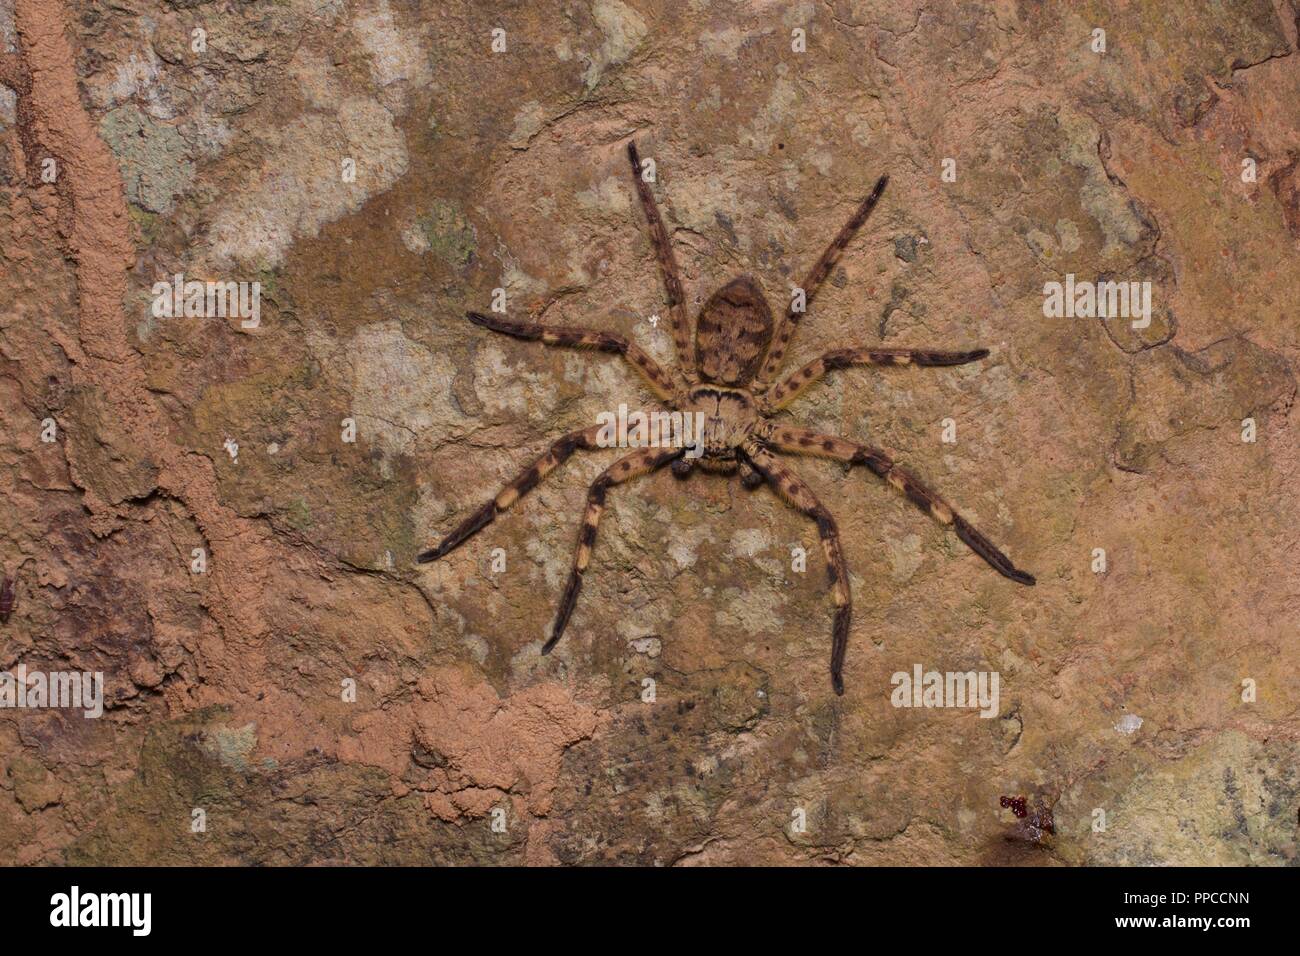 A huntsman spider (family Sparassidae) perched on a flat rock at night in Bobiri Forest Reserve, Ghana, West Africa Stock Photo